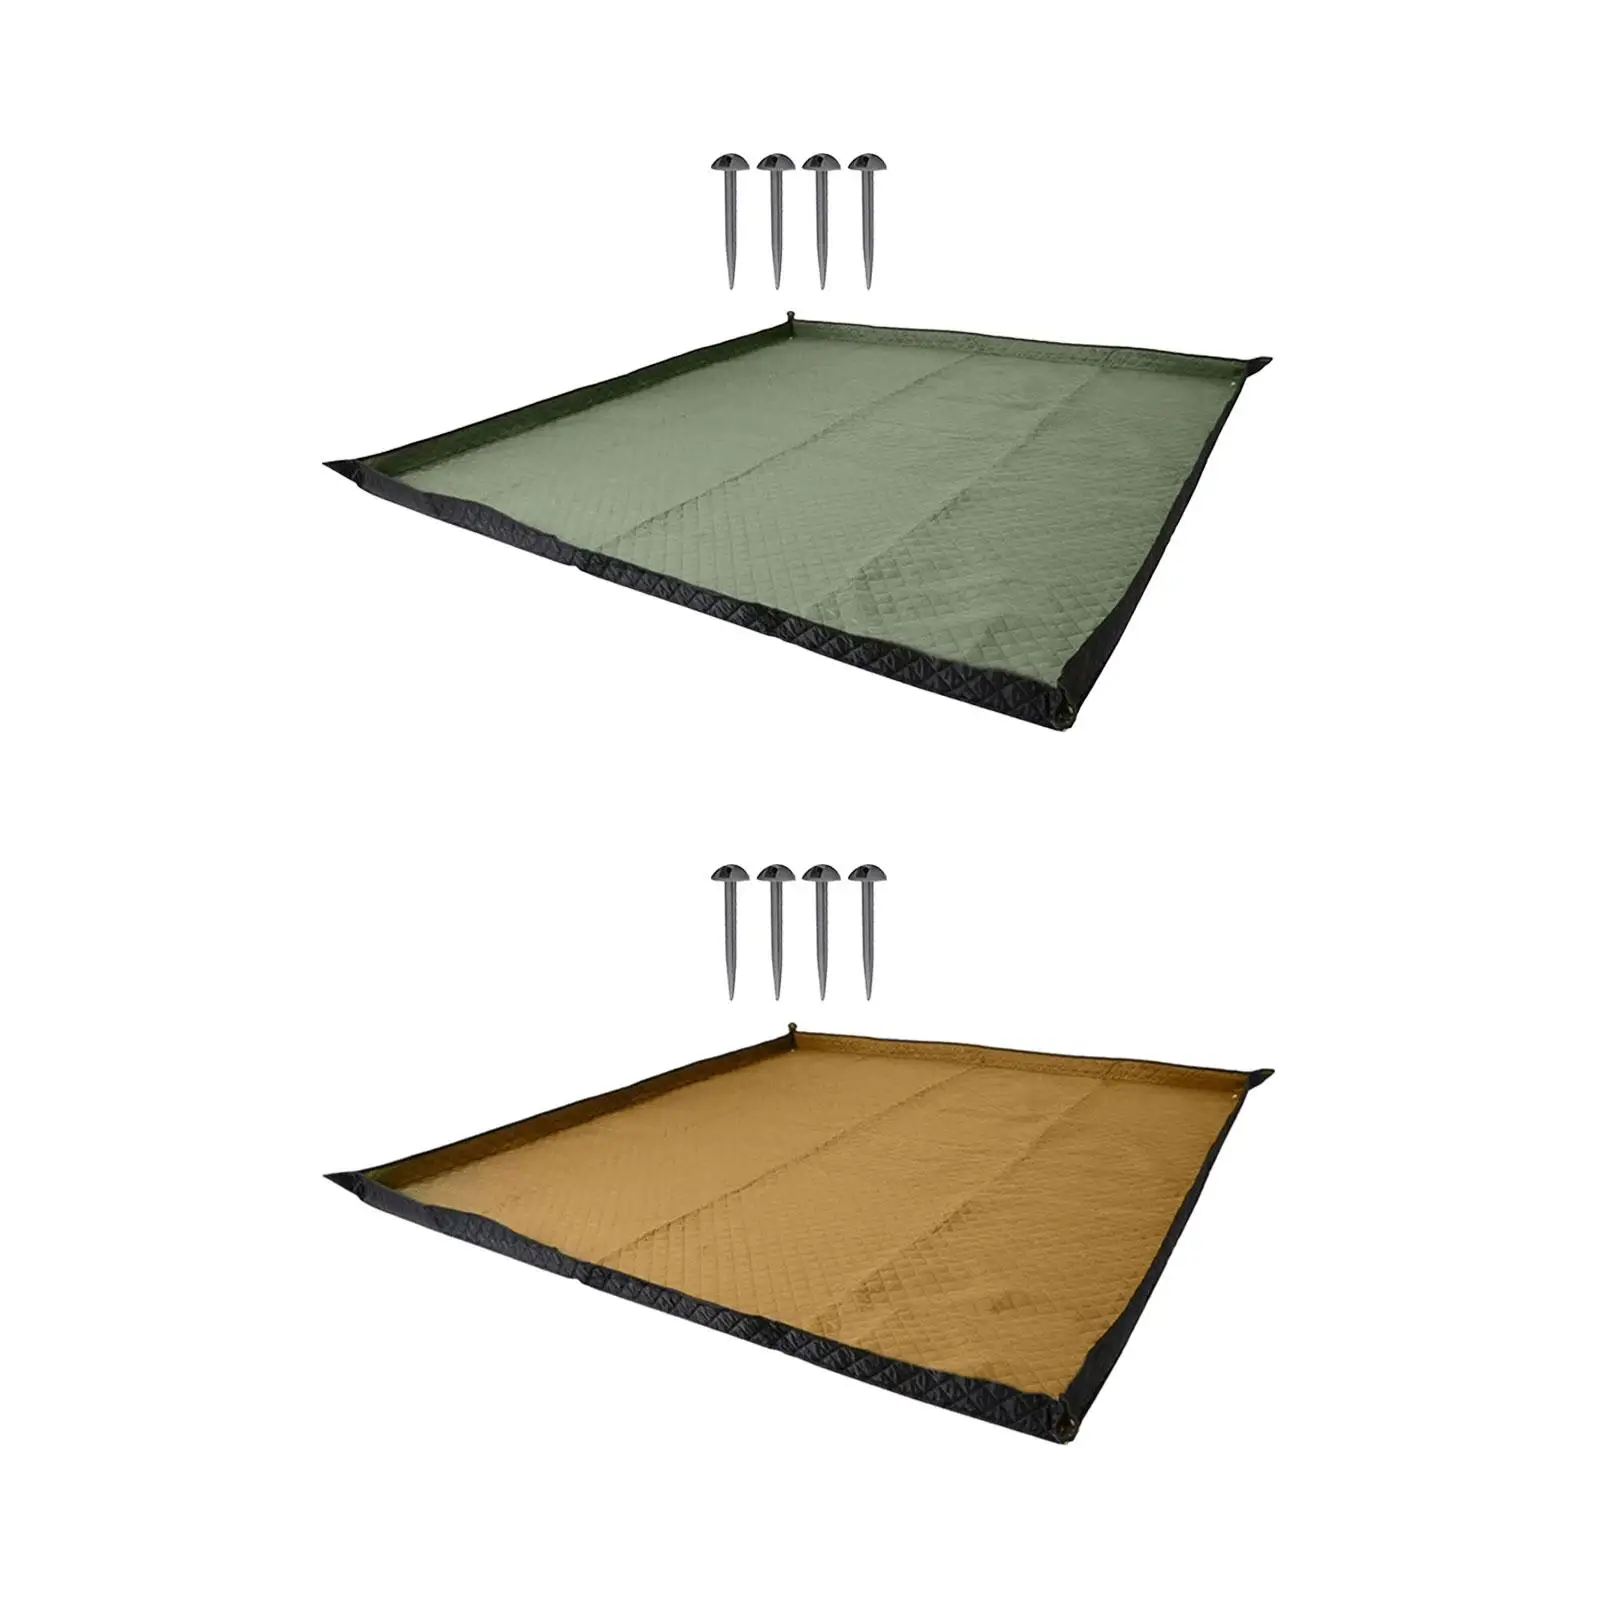 Picnic Blanket Rug Foldable Beach Mat Tent Pad for Family Party Concerts